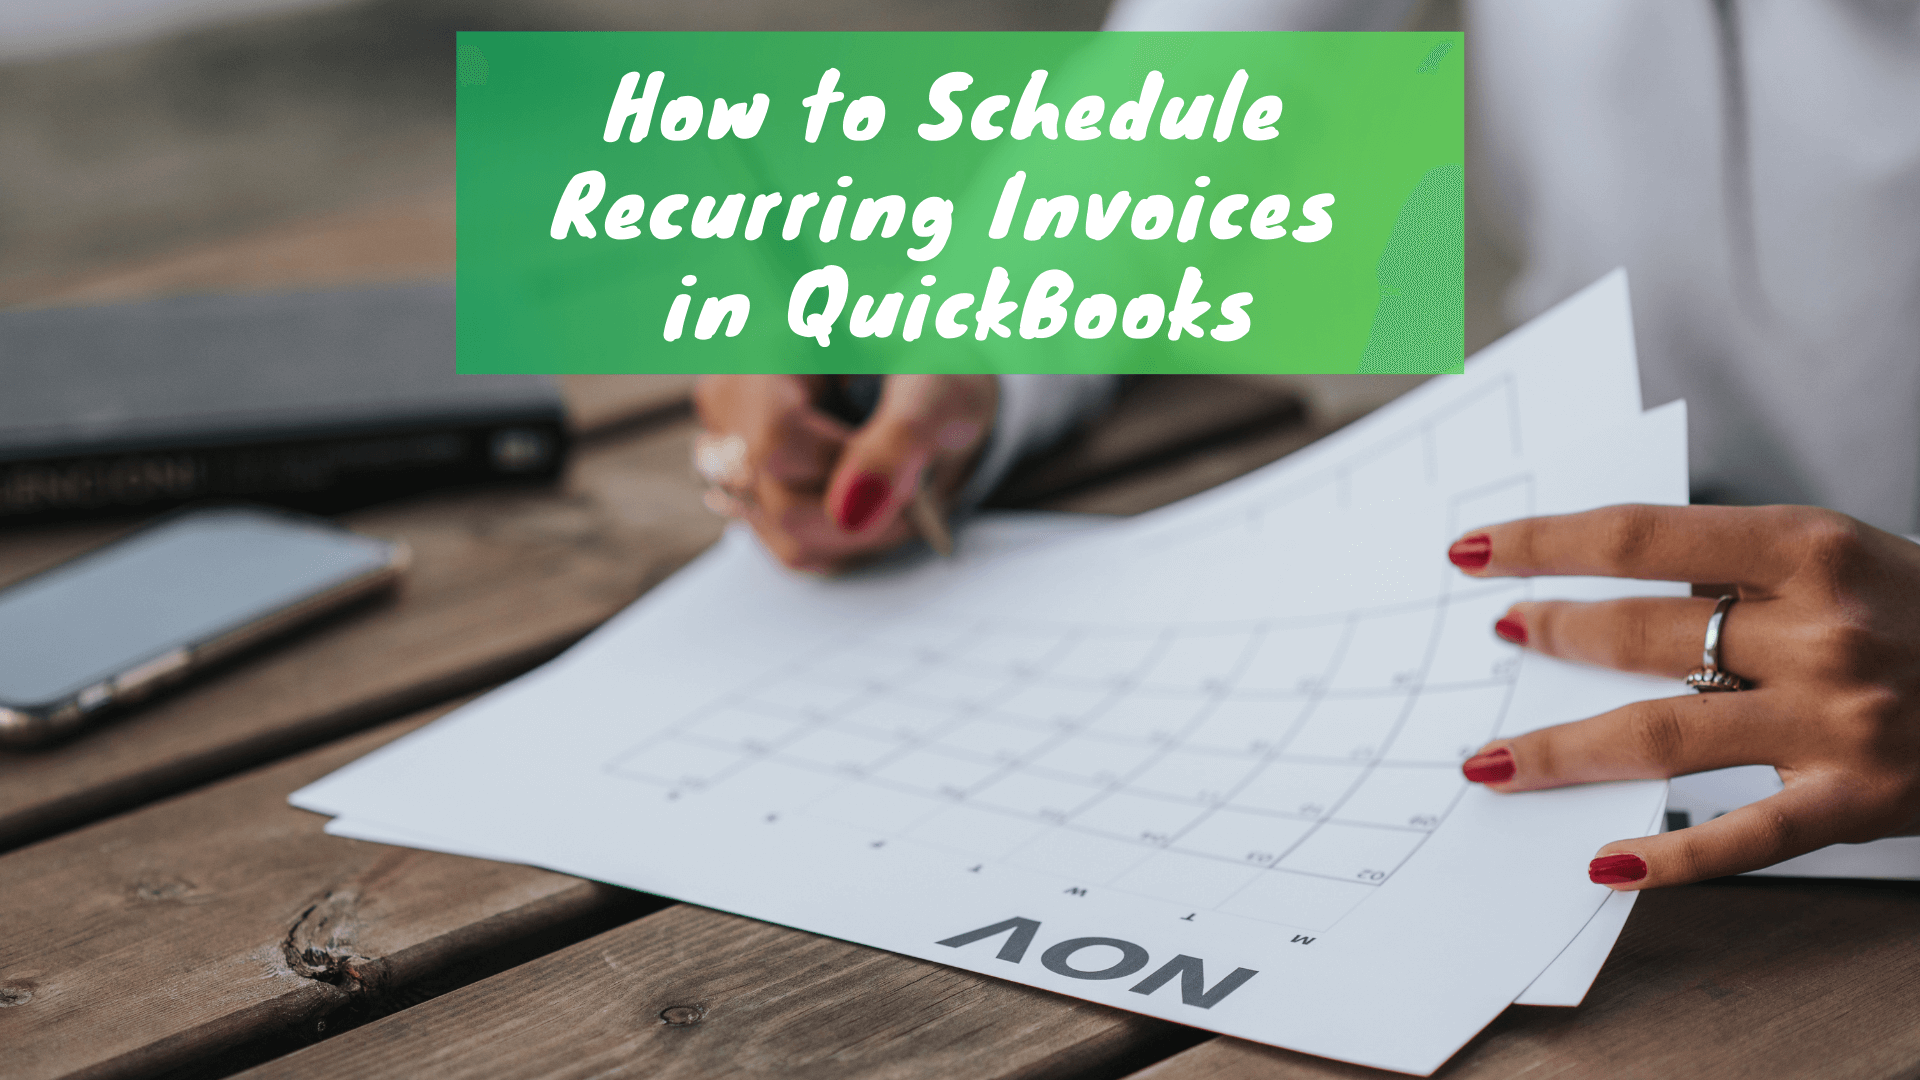 Do you need to send out recurring invoices? Here's a step-by-step guide for you to know how to schedule recurring invoices in QuickBooks.